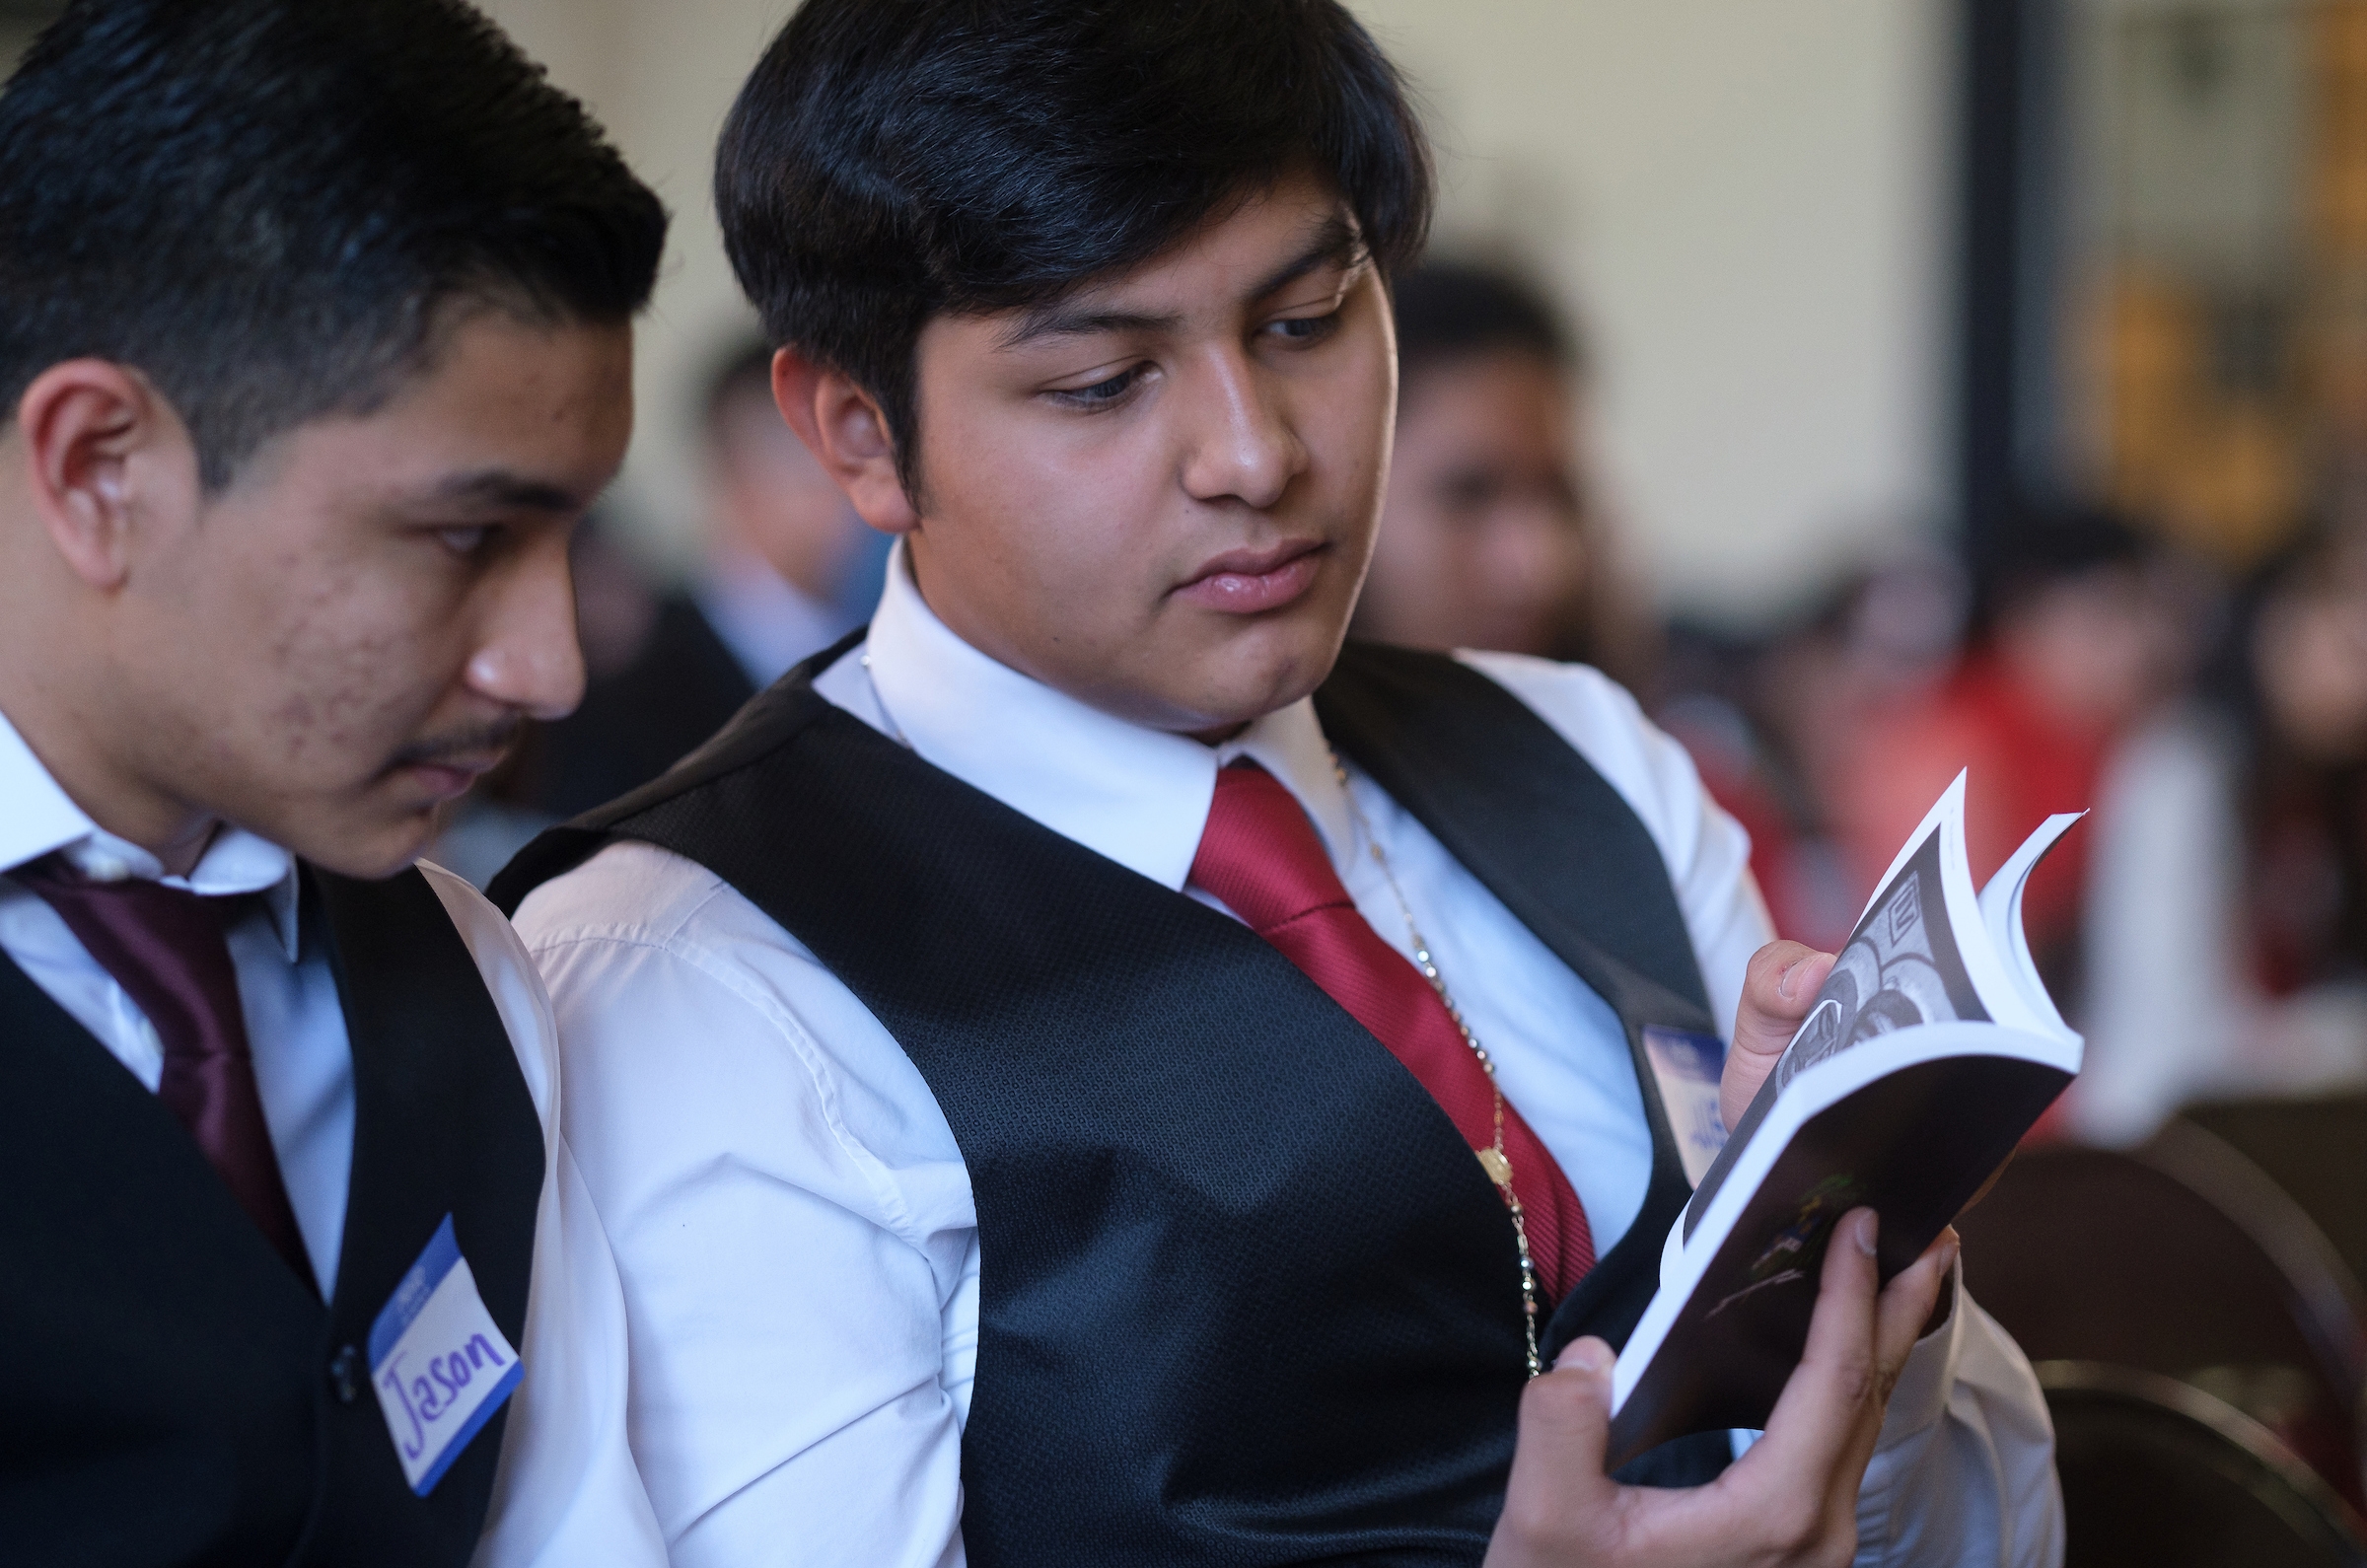 On April 24, 2019 - 204 Holy Family Parish, Seattle (White Center) teens were confirmed by Auxiliary Bishop Daniel Mueggenborg, who gave each of them a book of prayers he has collected over the years prayer book Young